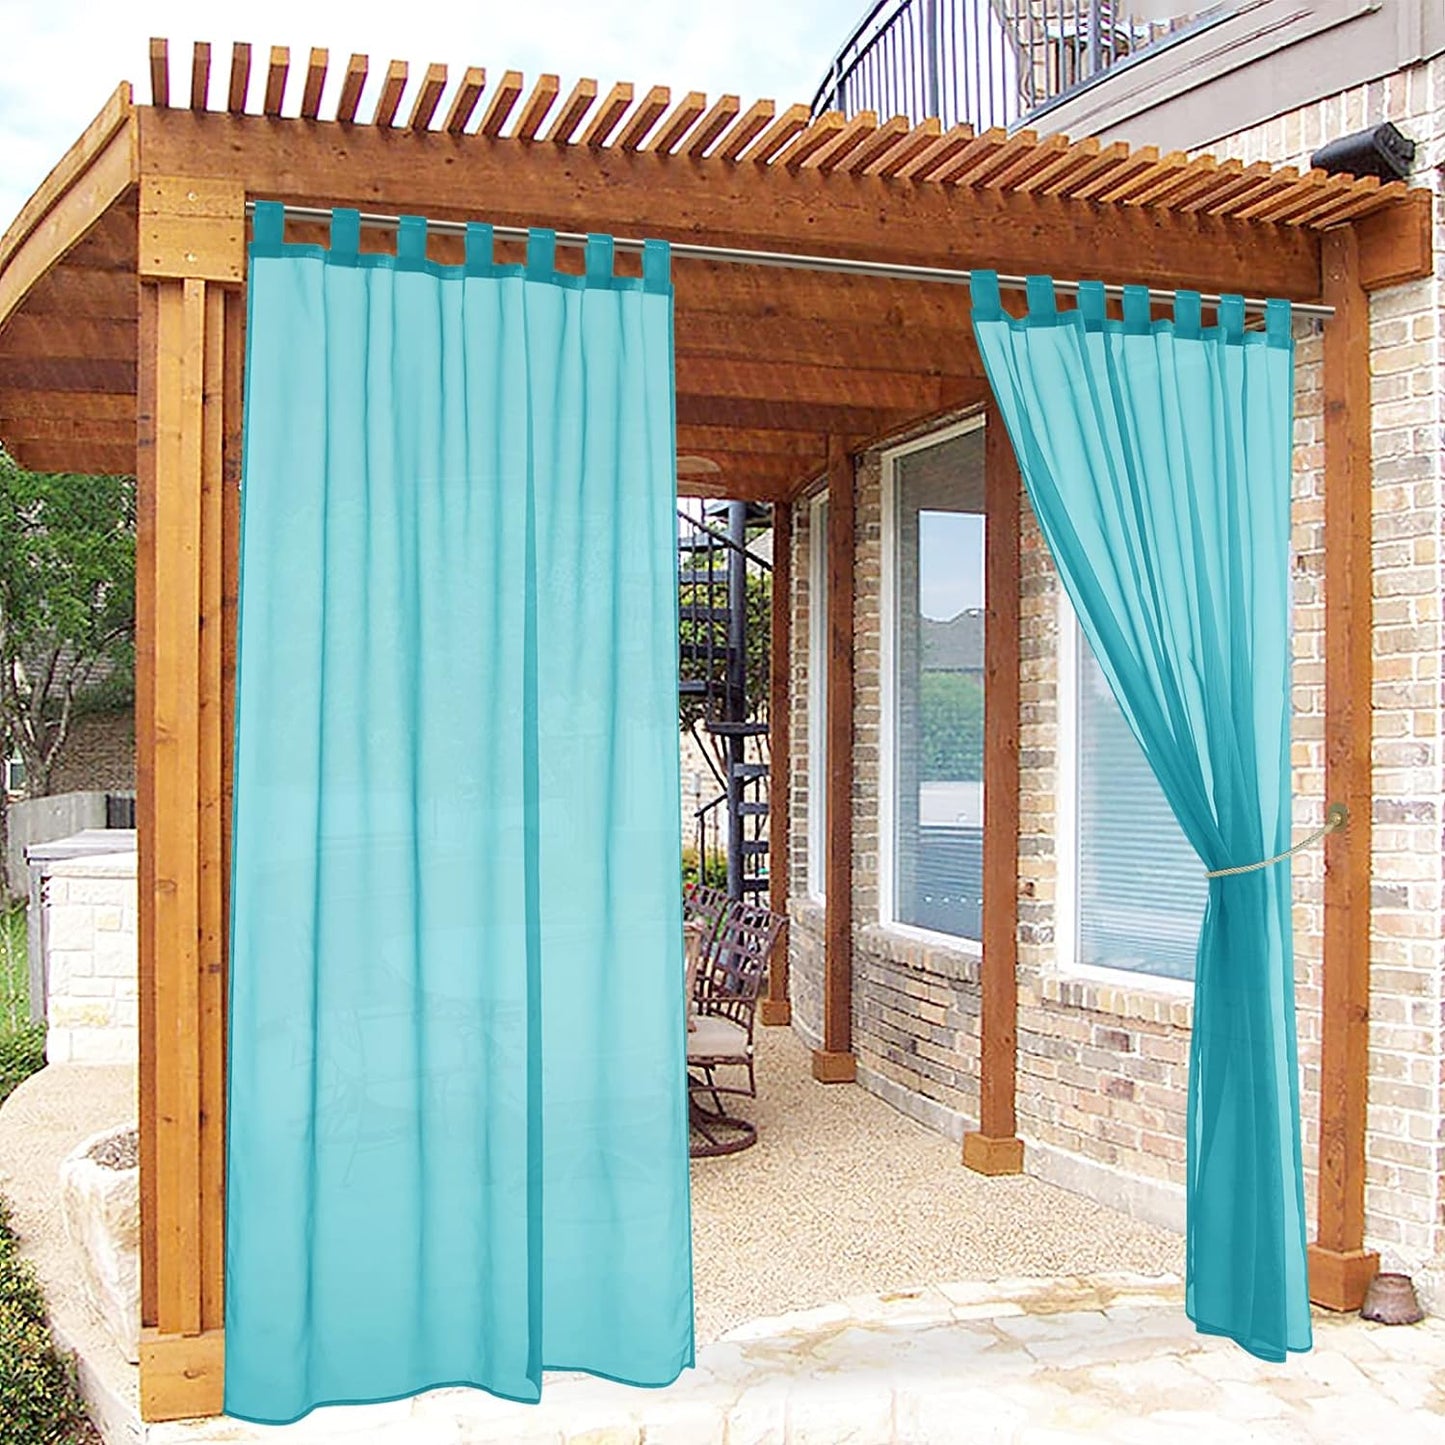 RYB HOME Outdoor Curtain for Patio, Detachable Sticky Tab Top for Easy Hanging & Unsling, Waterproof outside Porch White Sheer Drape Indoor Outdoor Deck, 1 Curtain Rope, W 54 X L 84 Inch Long  RYB HOME Teal W 54 X L 108 